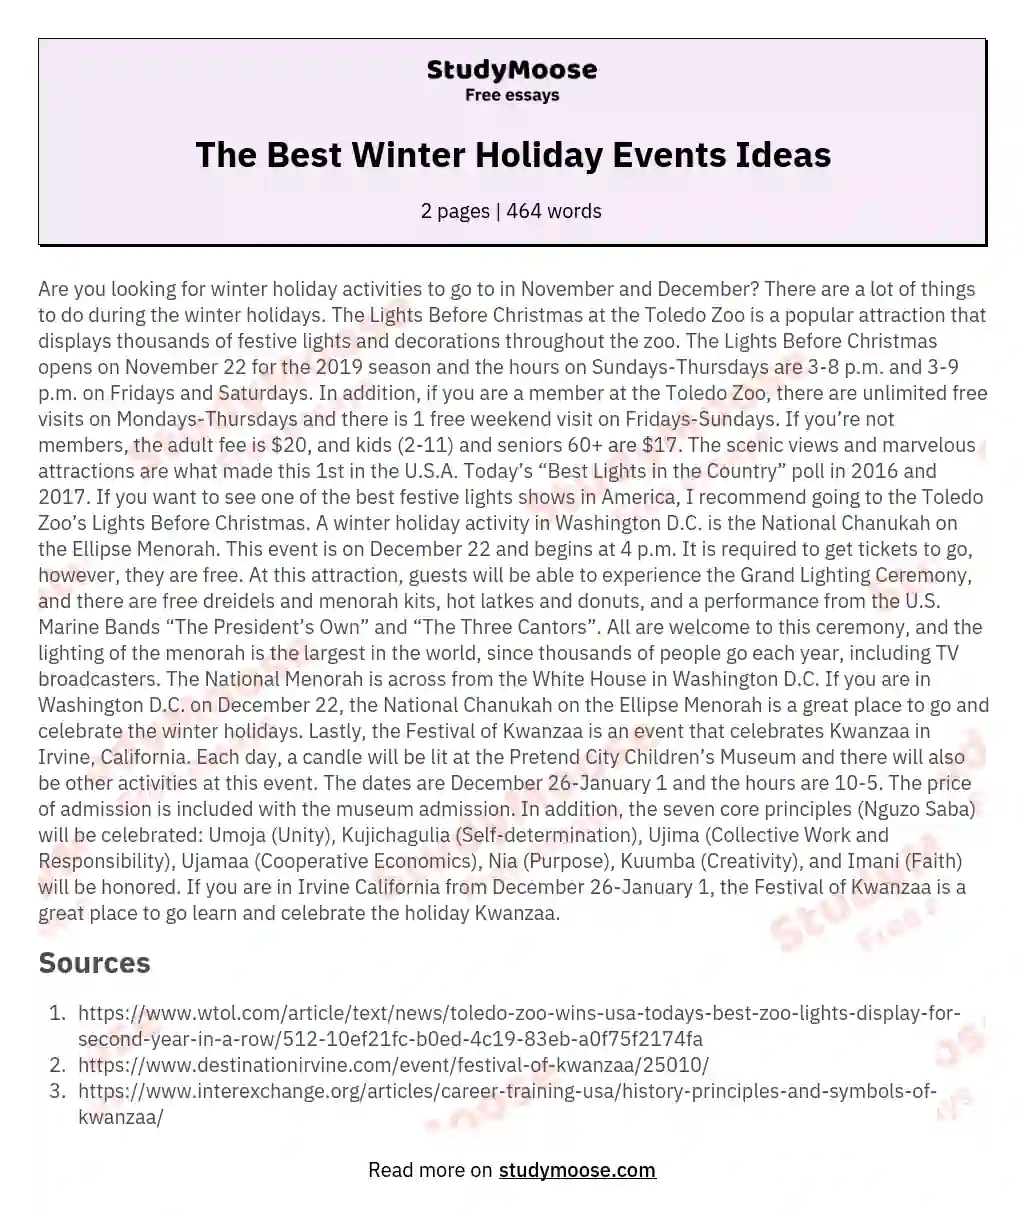 The Best Winter Holiday Events Ideas essay